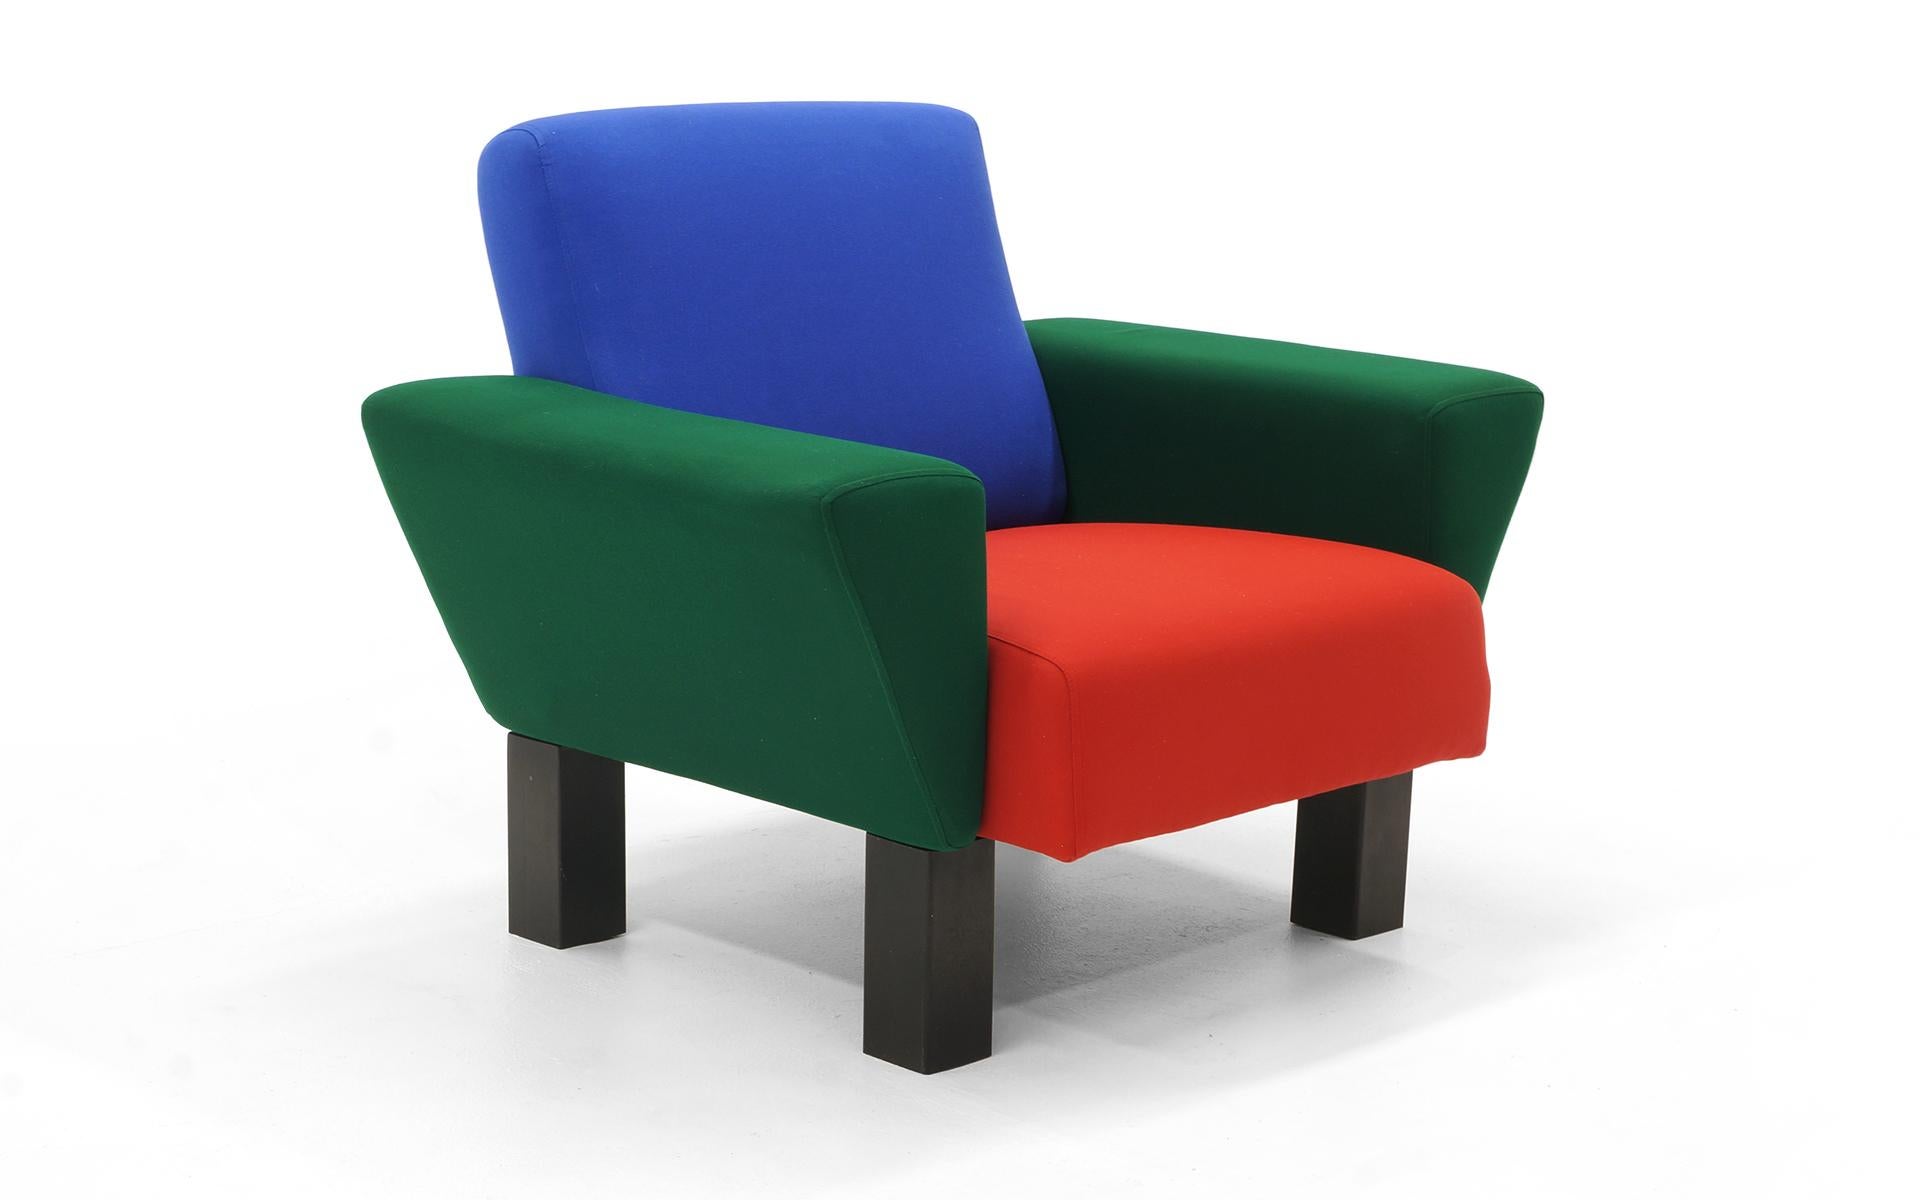 Rare Westside lounge chair by the master of Postmodern design, Ettore Sottsass. Expertly restored and reupholstered in the identical color fabric as the original. Made by Knoll.